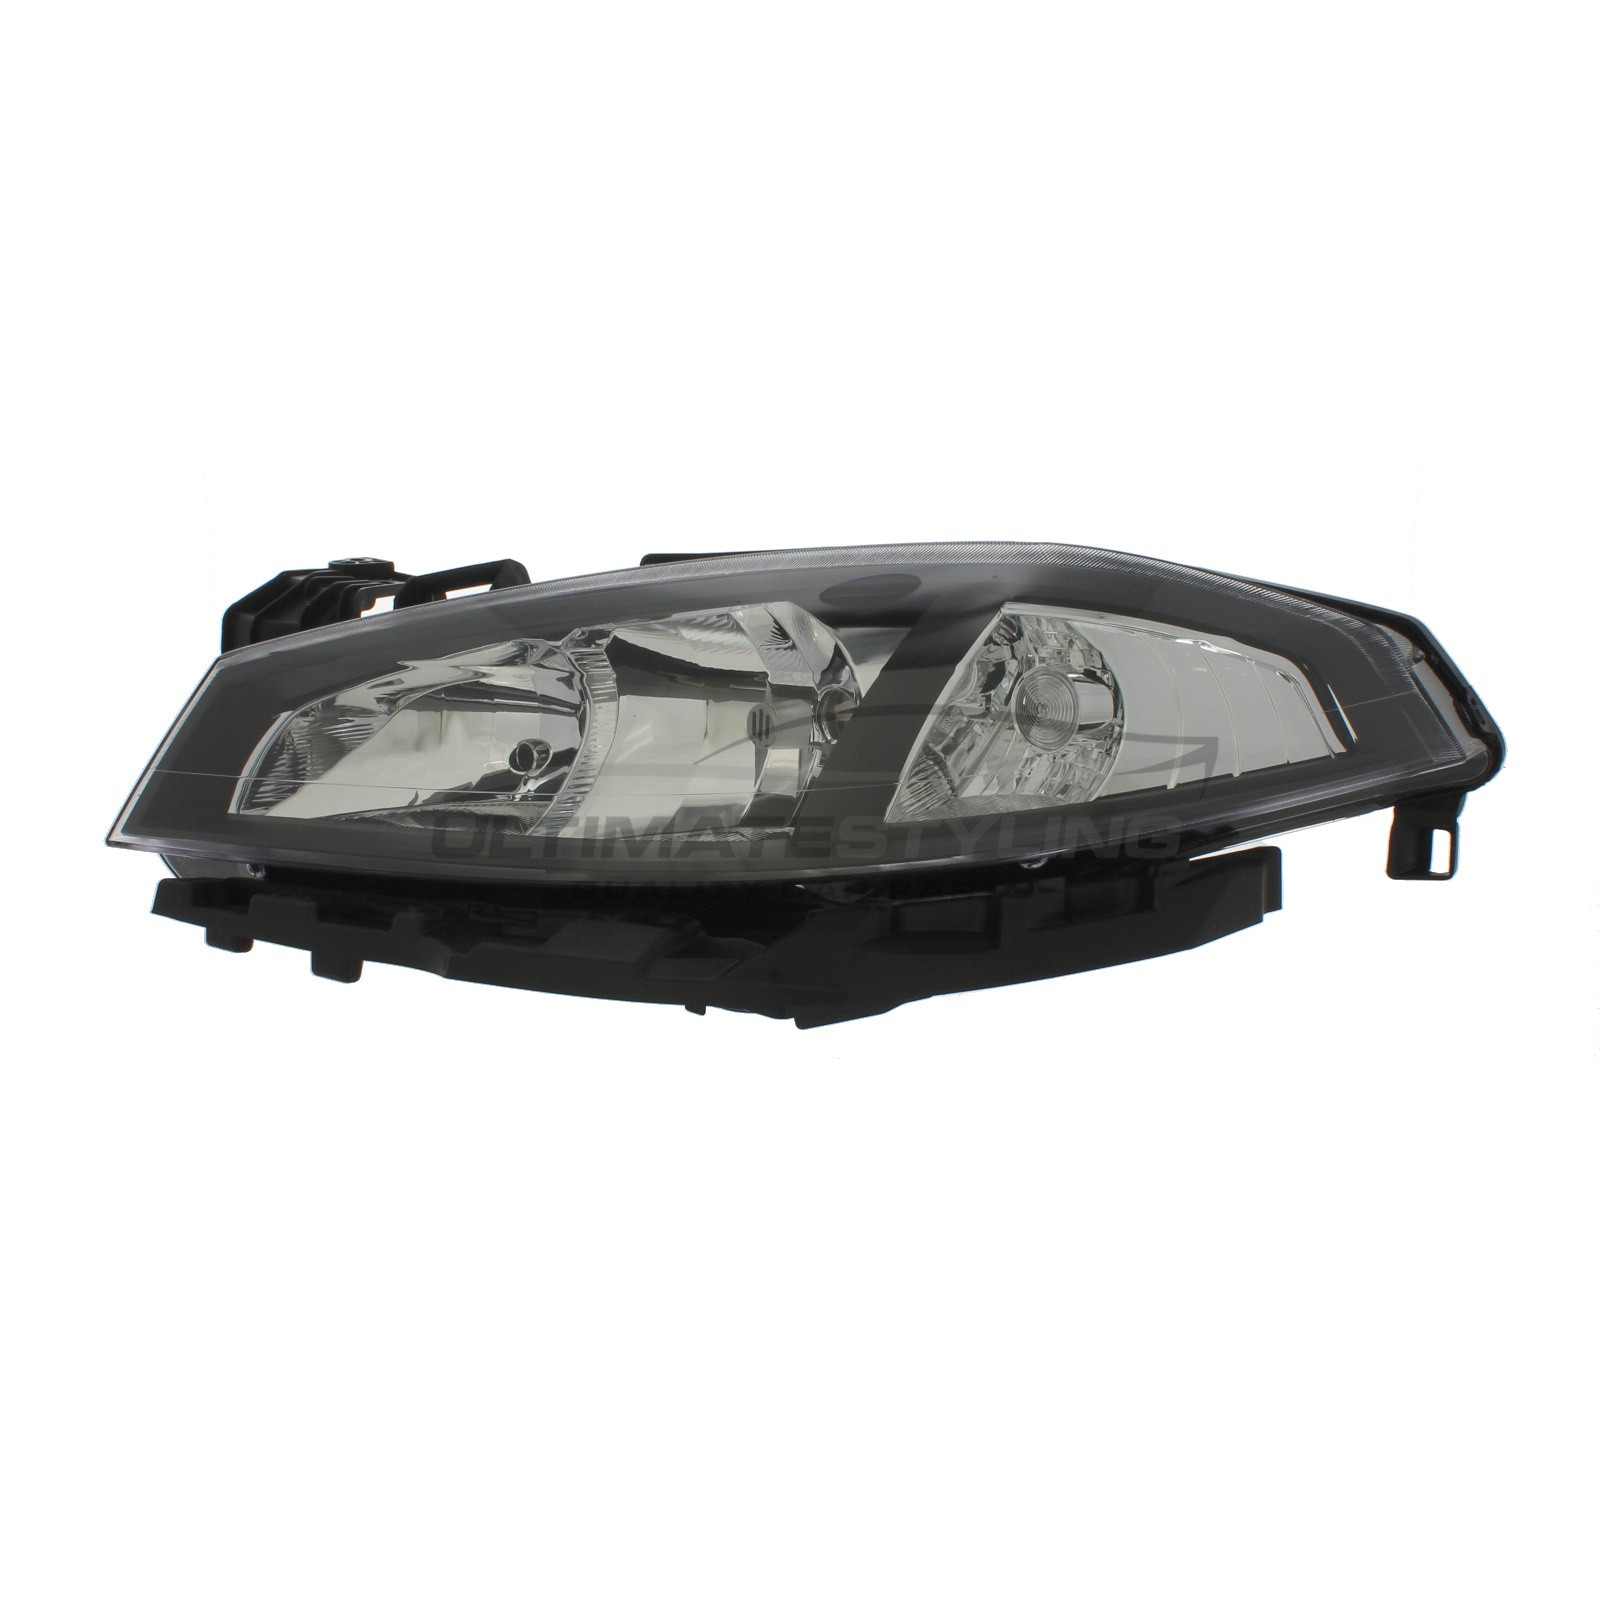 Renault Laguna 2005-2007 Halogen, Electric Without Motor, Chrome Headlight / Headlamp with Black Surround Passengers Side (LH)